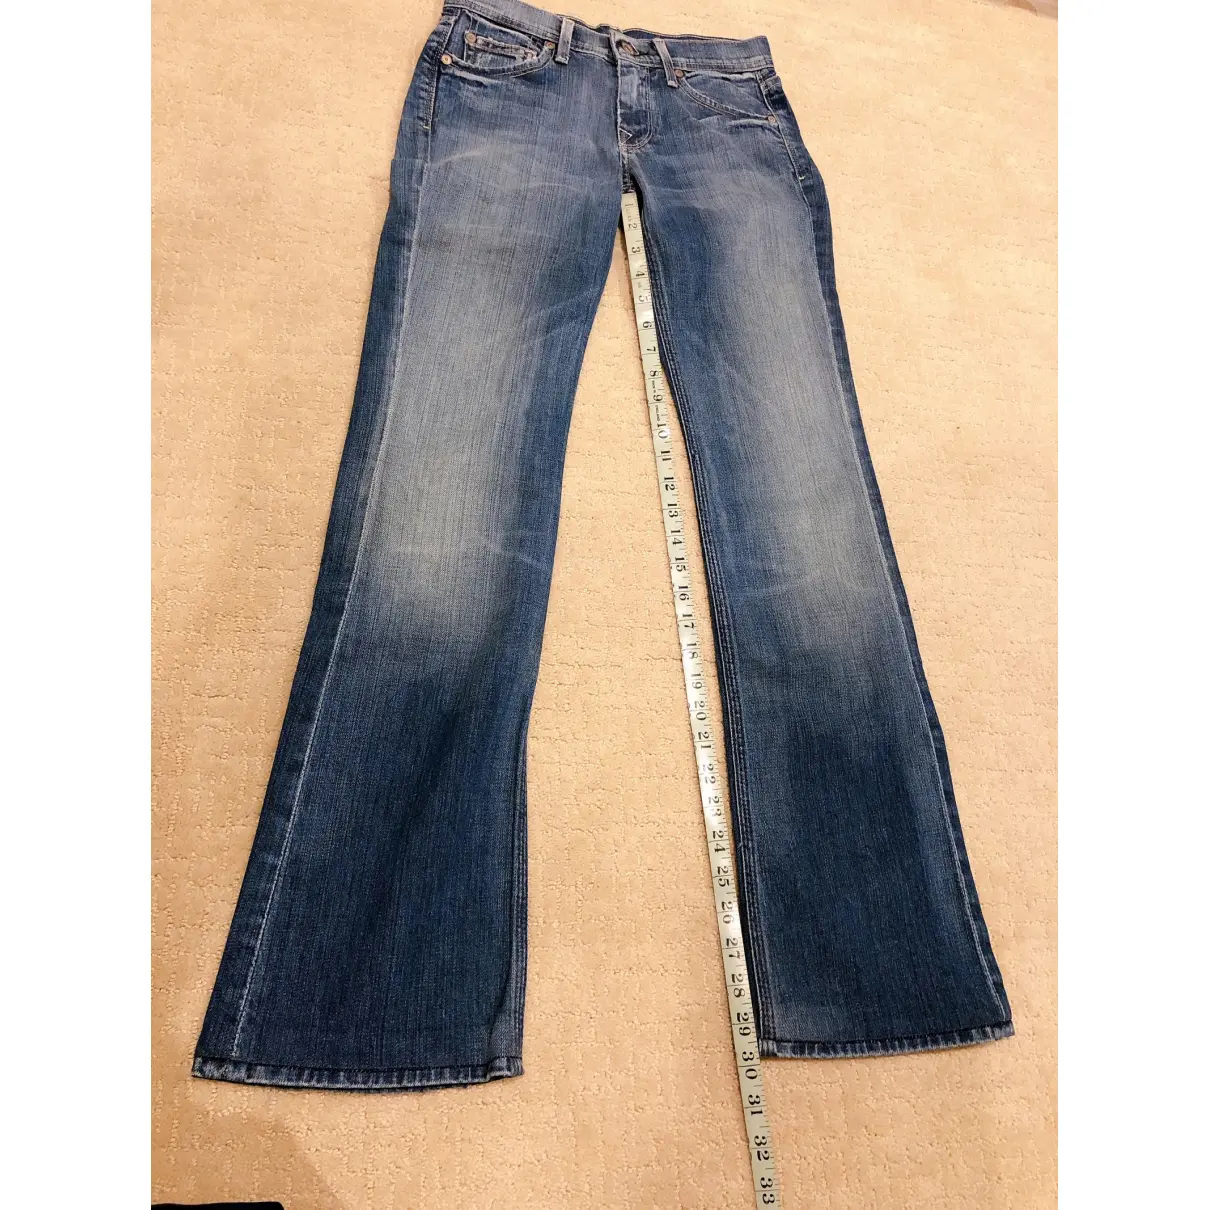 Blue Denim - Jeans Jeans 7 For All Mankind